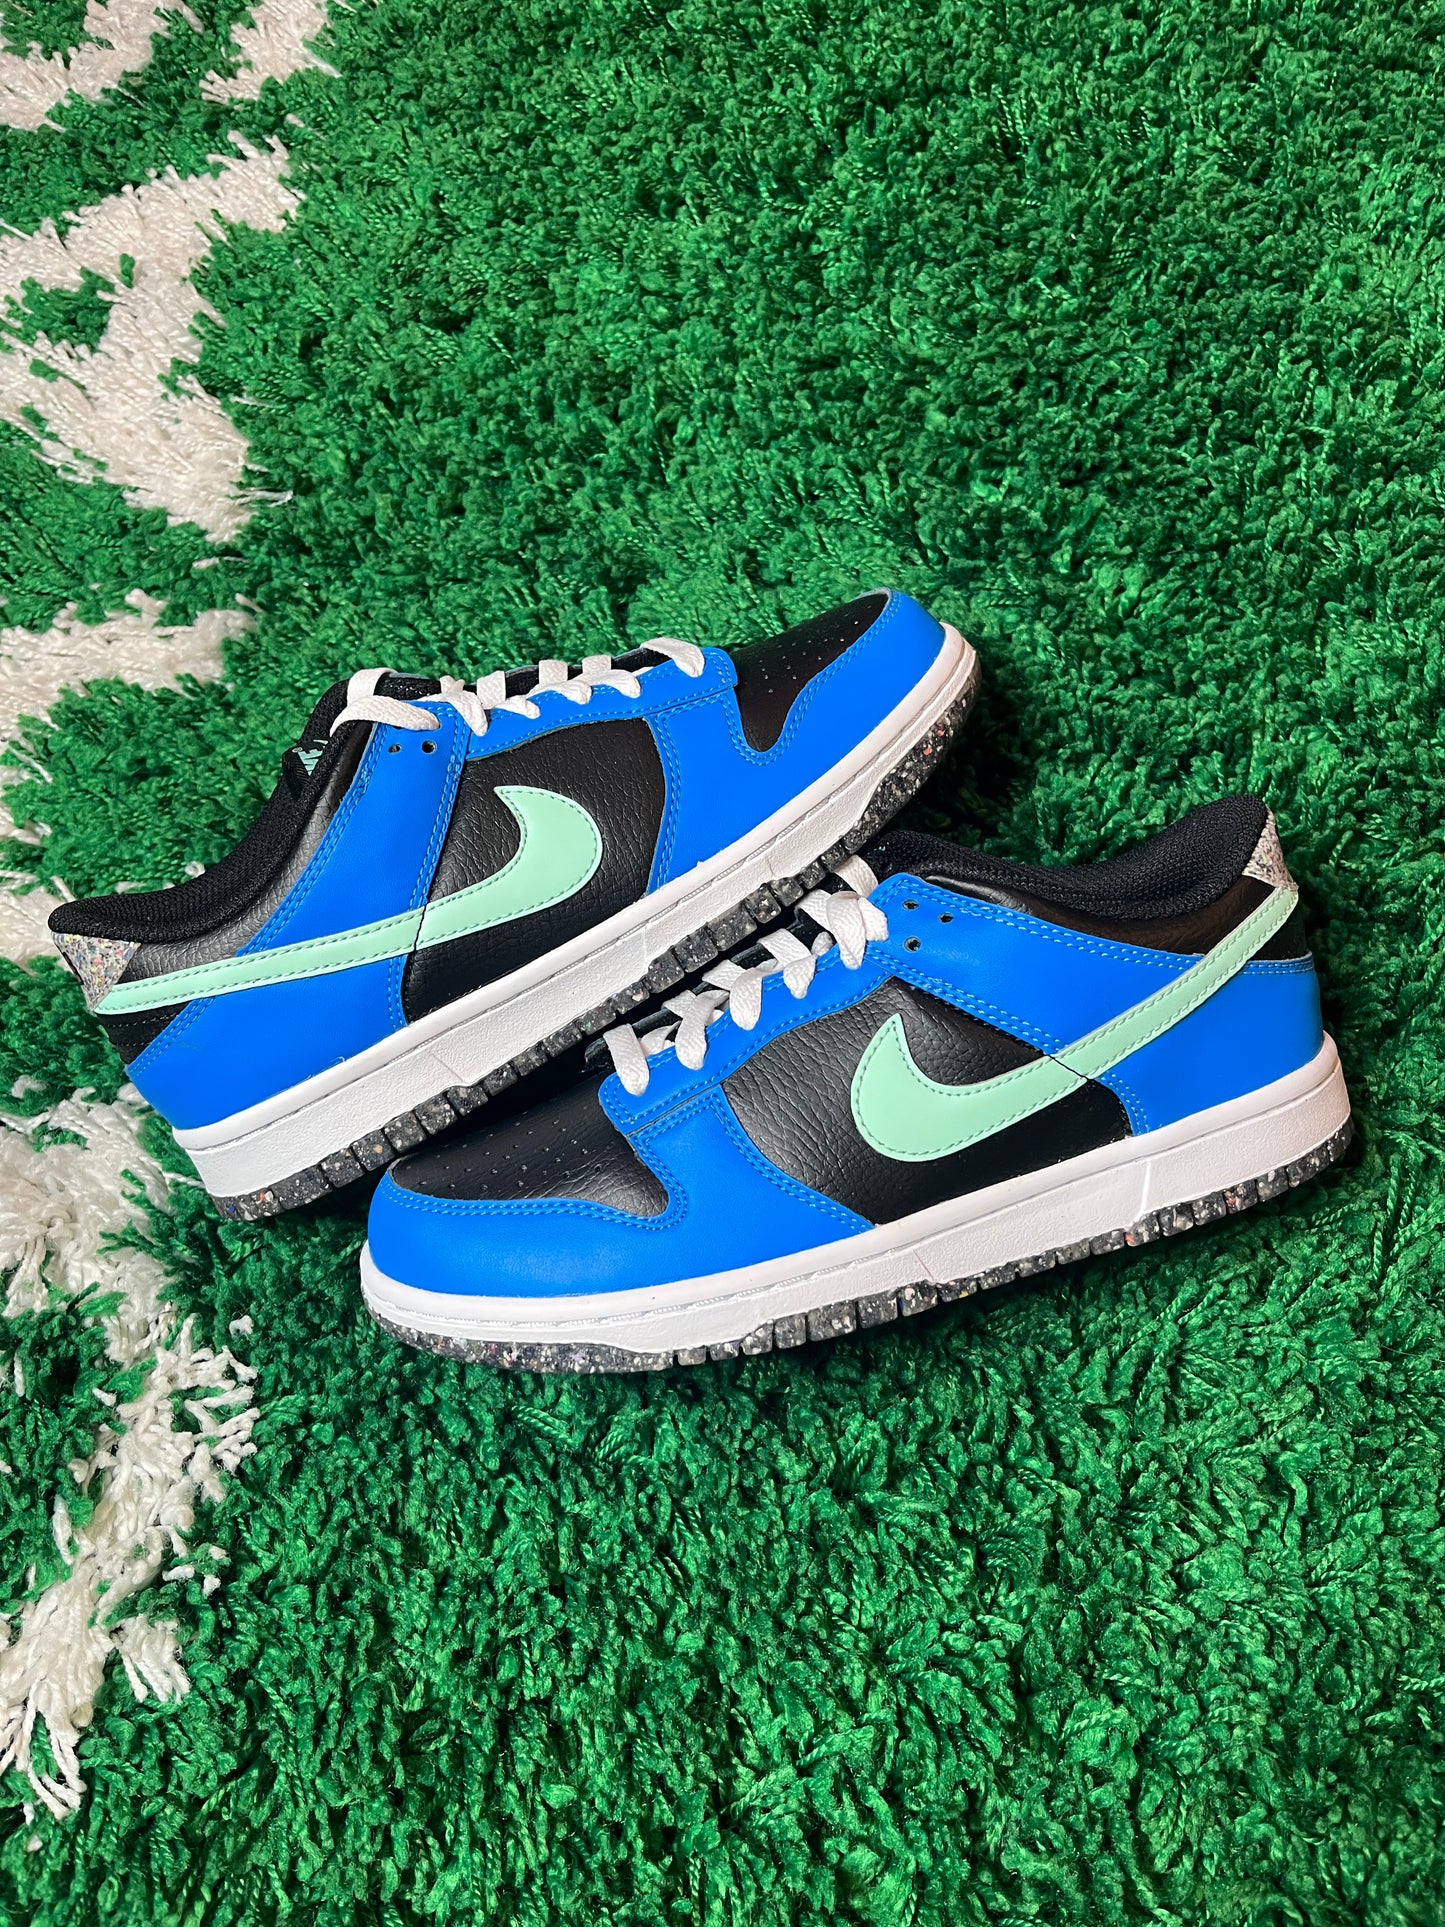 Nike Dunk Low “Crater Blue Black”